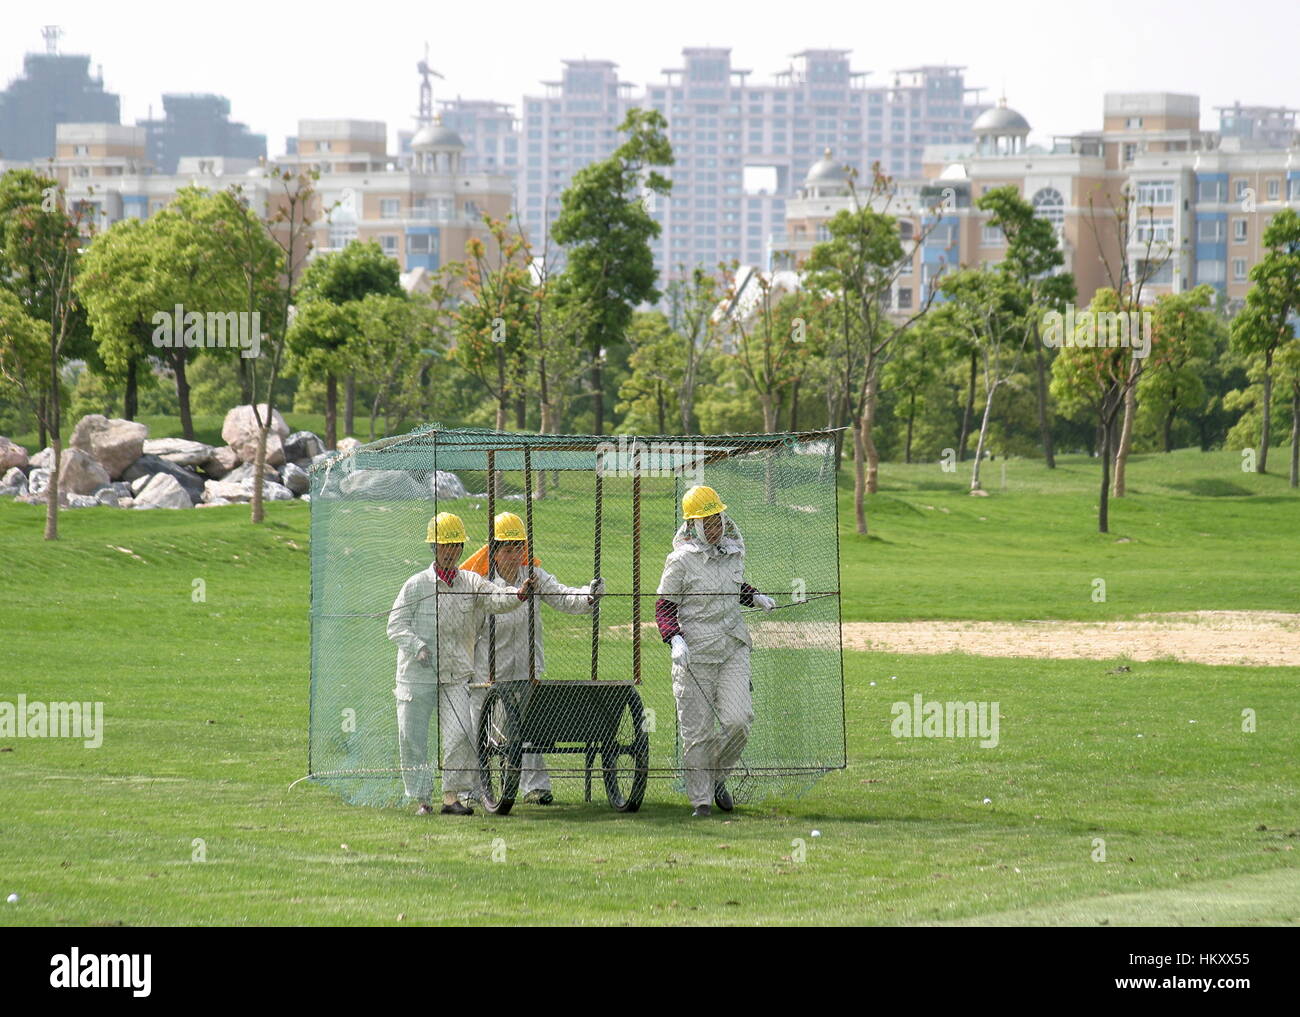 Women in a cage walk over the driving range to collect golf balls, Tomson Golf Club, BMW Asian Open 2004, Shanghai, China Stock Photo